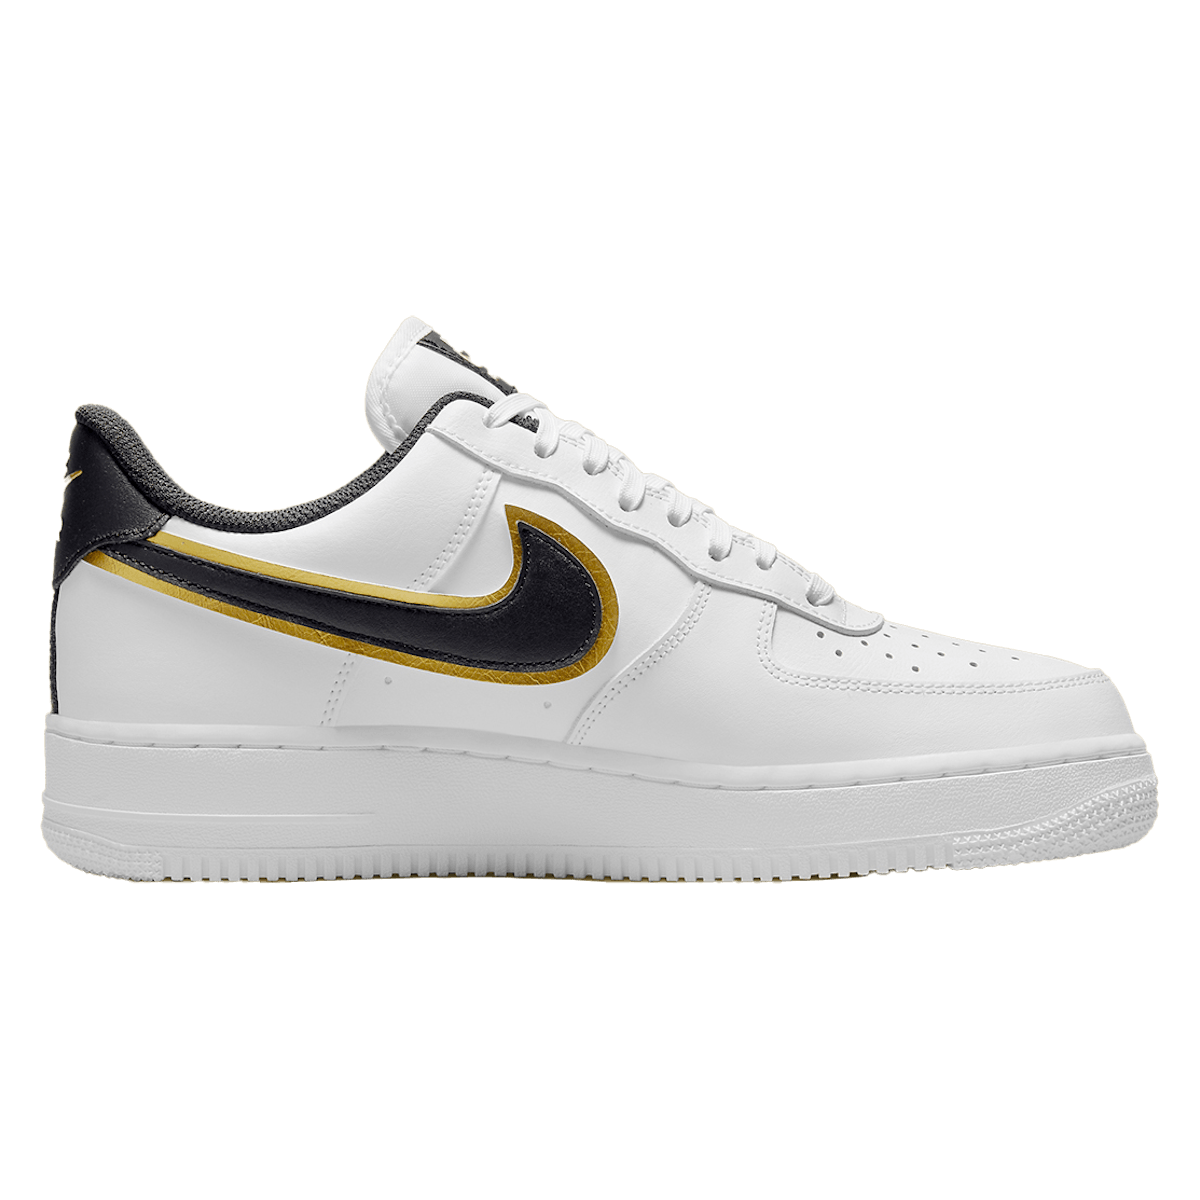 Nike Air Force 1 Low "Double Swoosh White"